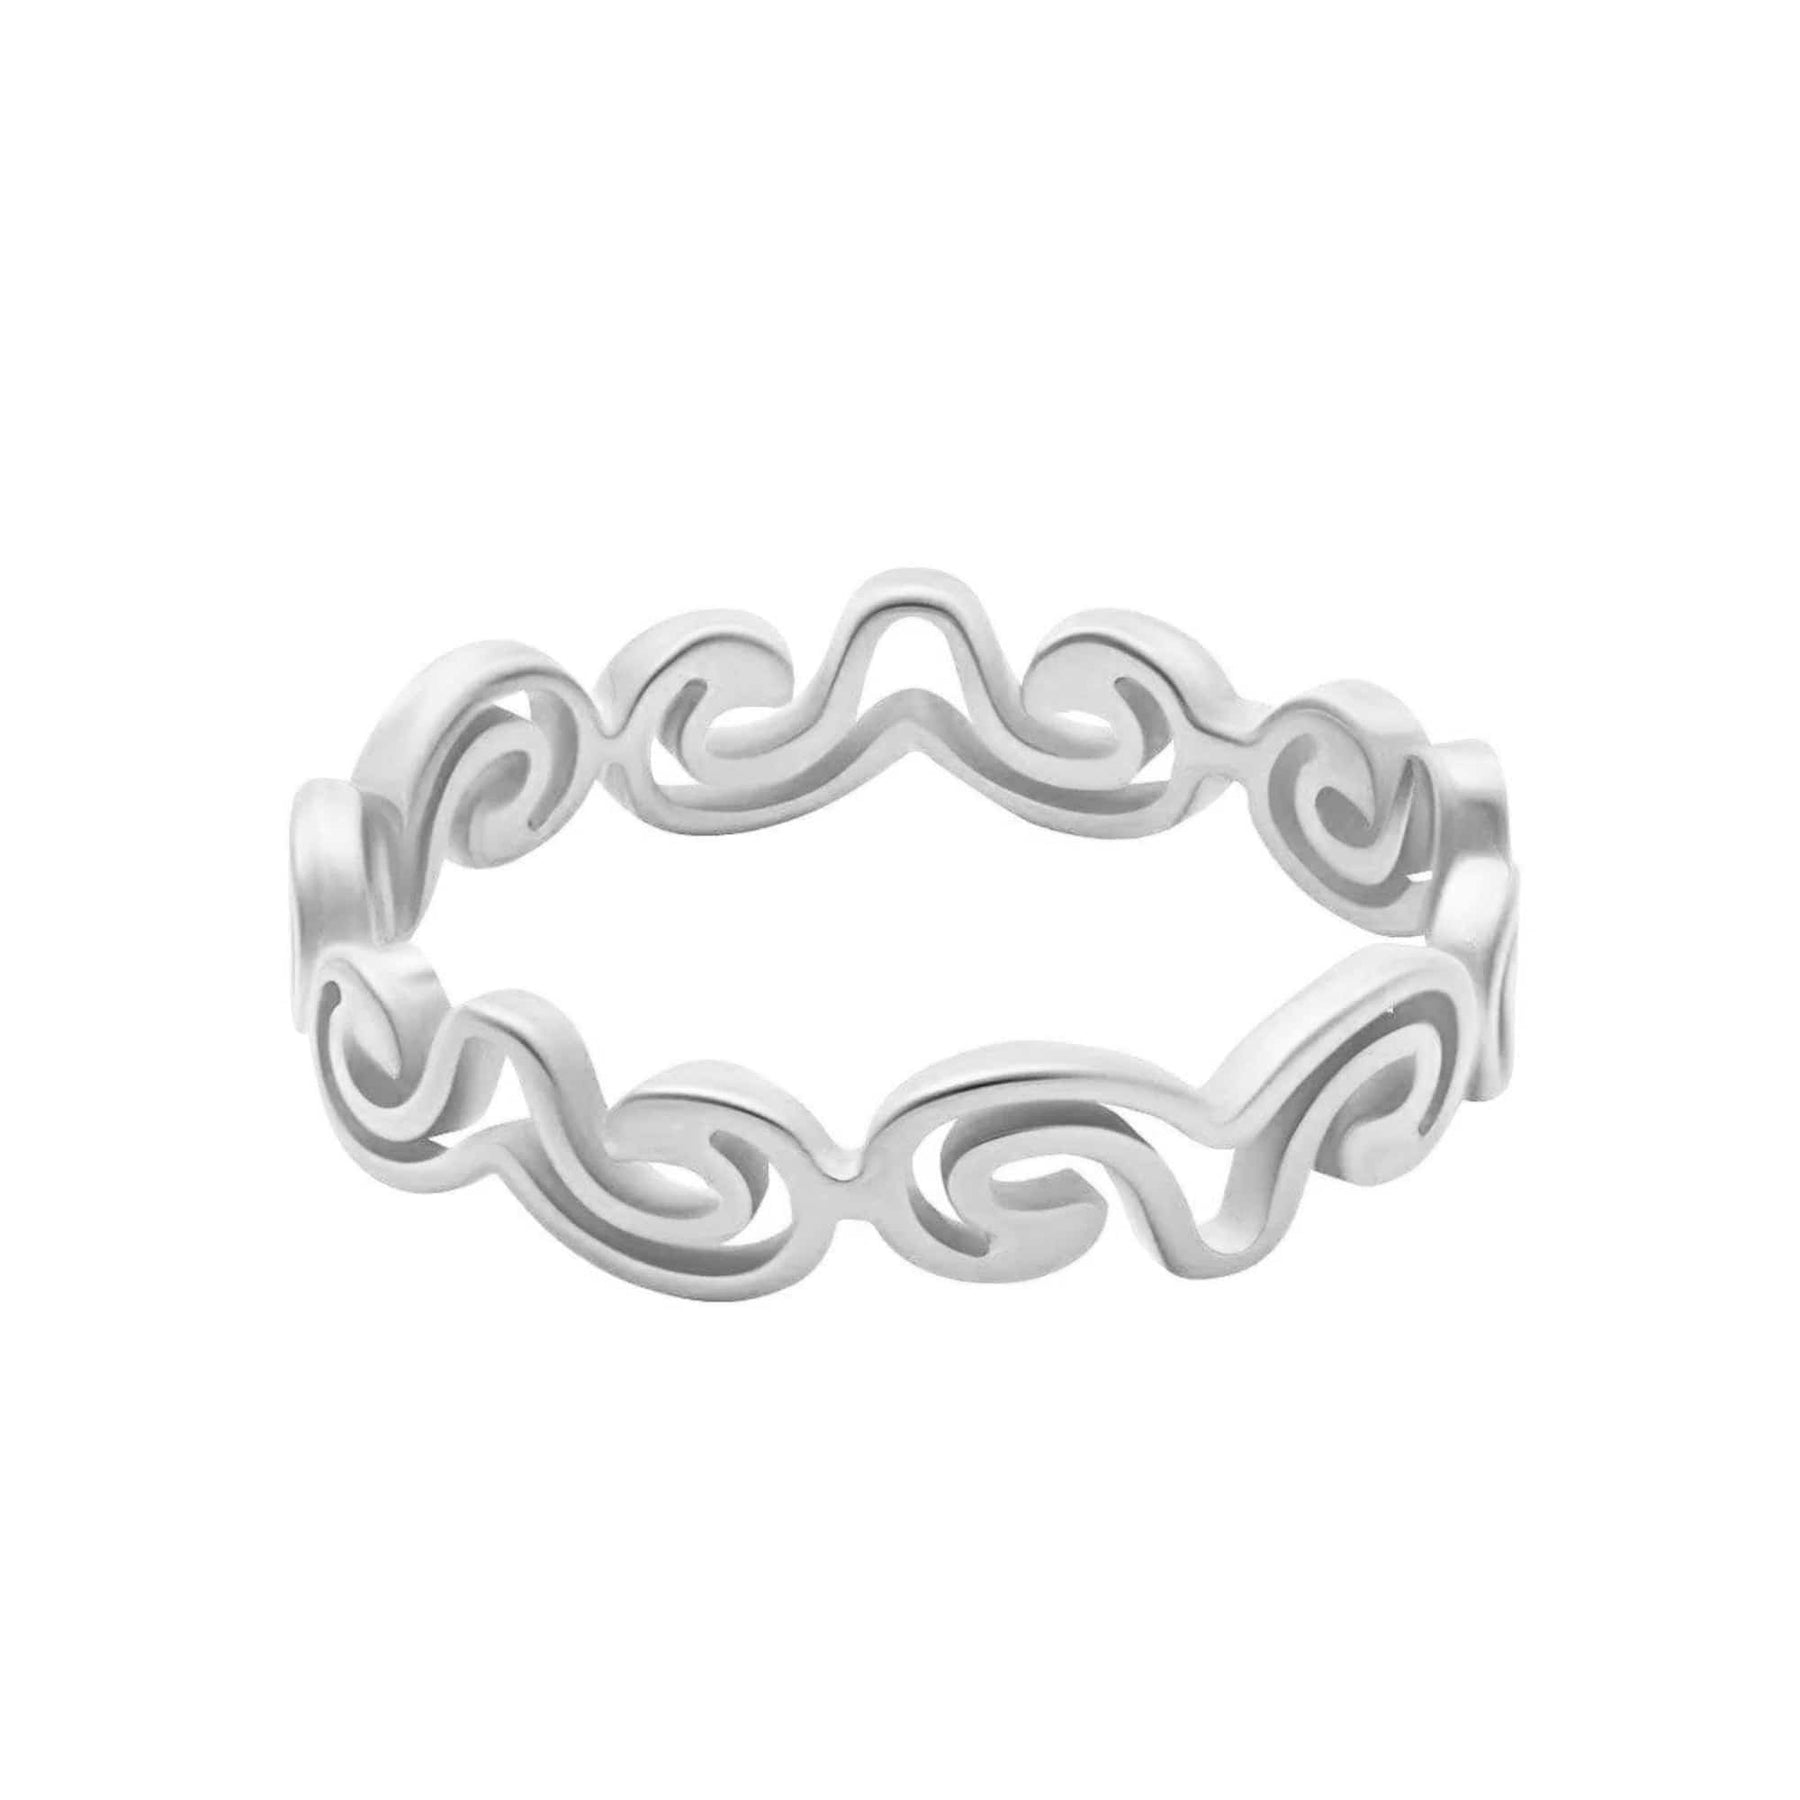 Bohomoon Stainless Steel Vice Ring